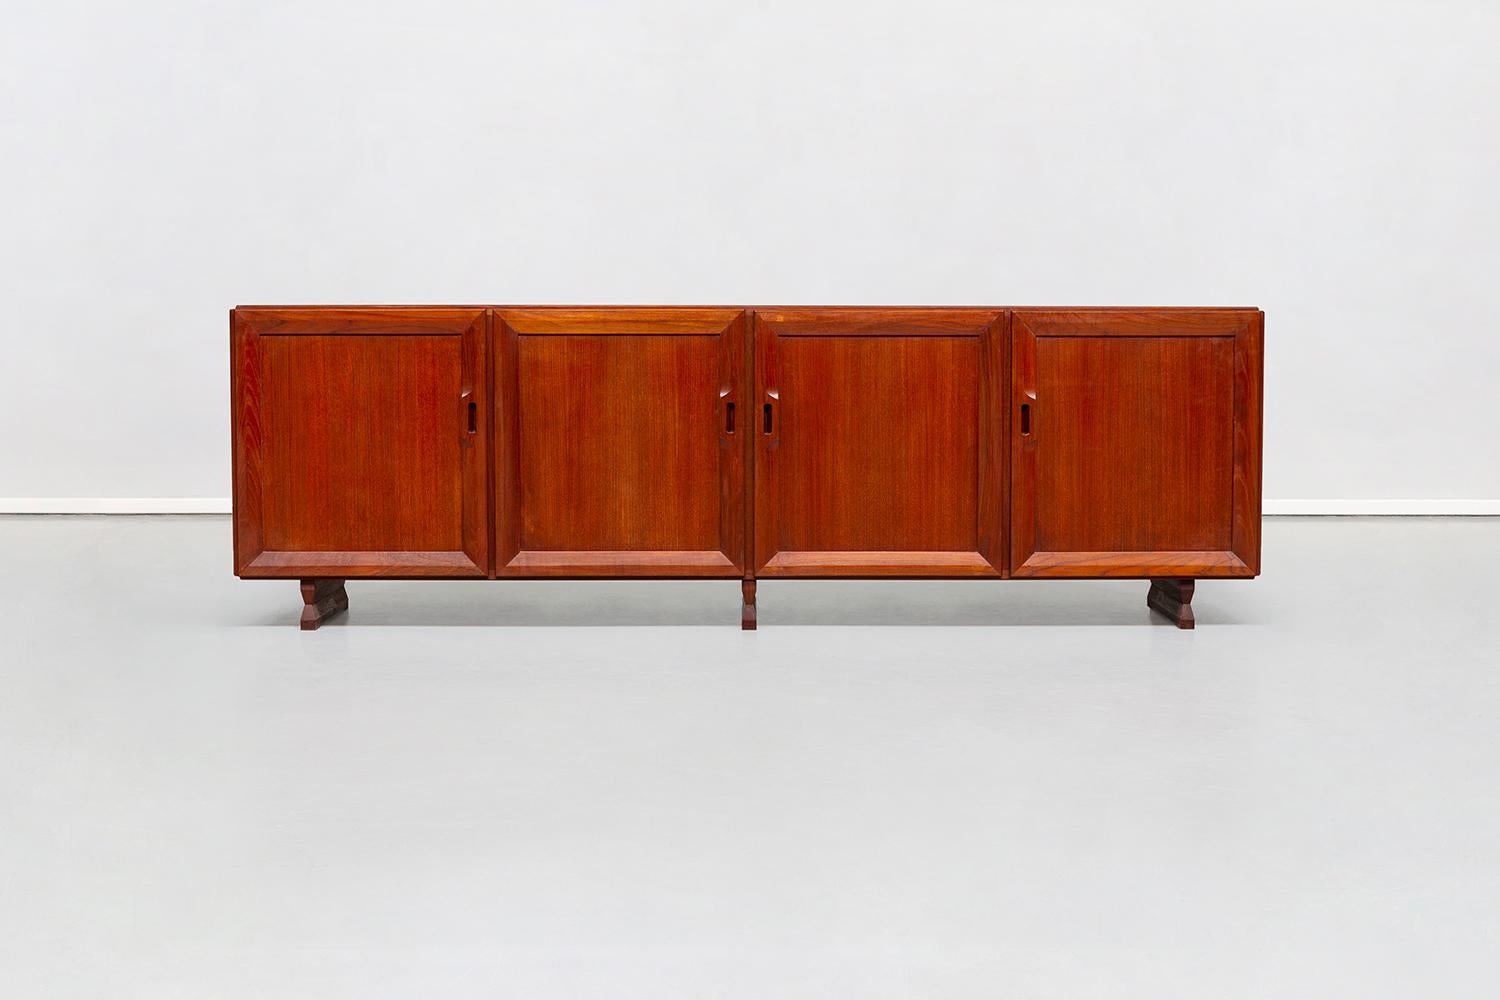 Midcentury MB15 sideboard in teak by Franco Albini for Poggi, 1957
Italian sideboard designed by Franco Albini for Poggi in the end of 1950s, with four doors that opens many spaces, each with its own shelf inside. Finely finished, a great wood